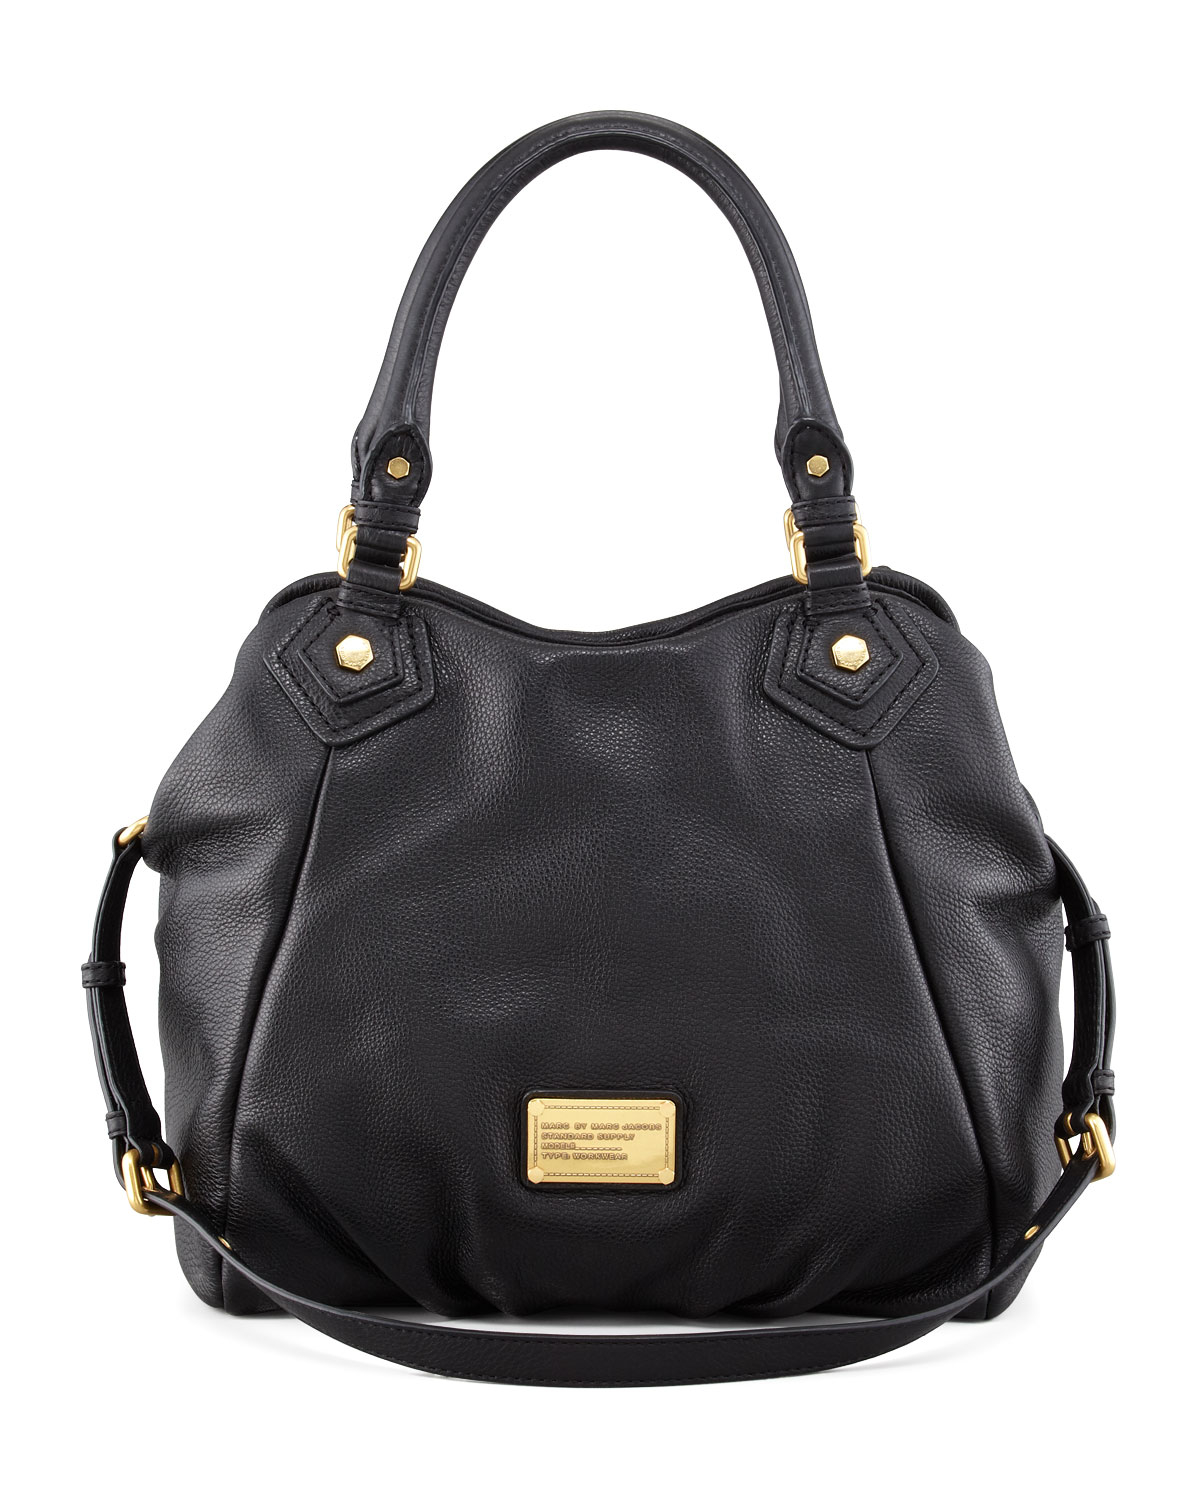 Marc By Marc Jacobs Classic Q Fran Hobo Bag in Black - Lyst